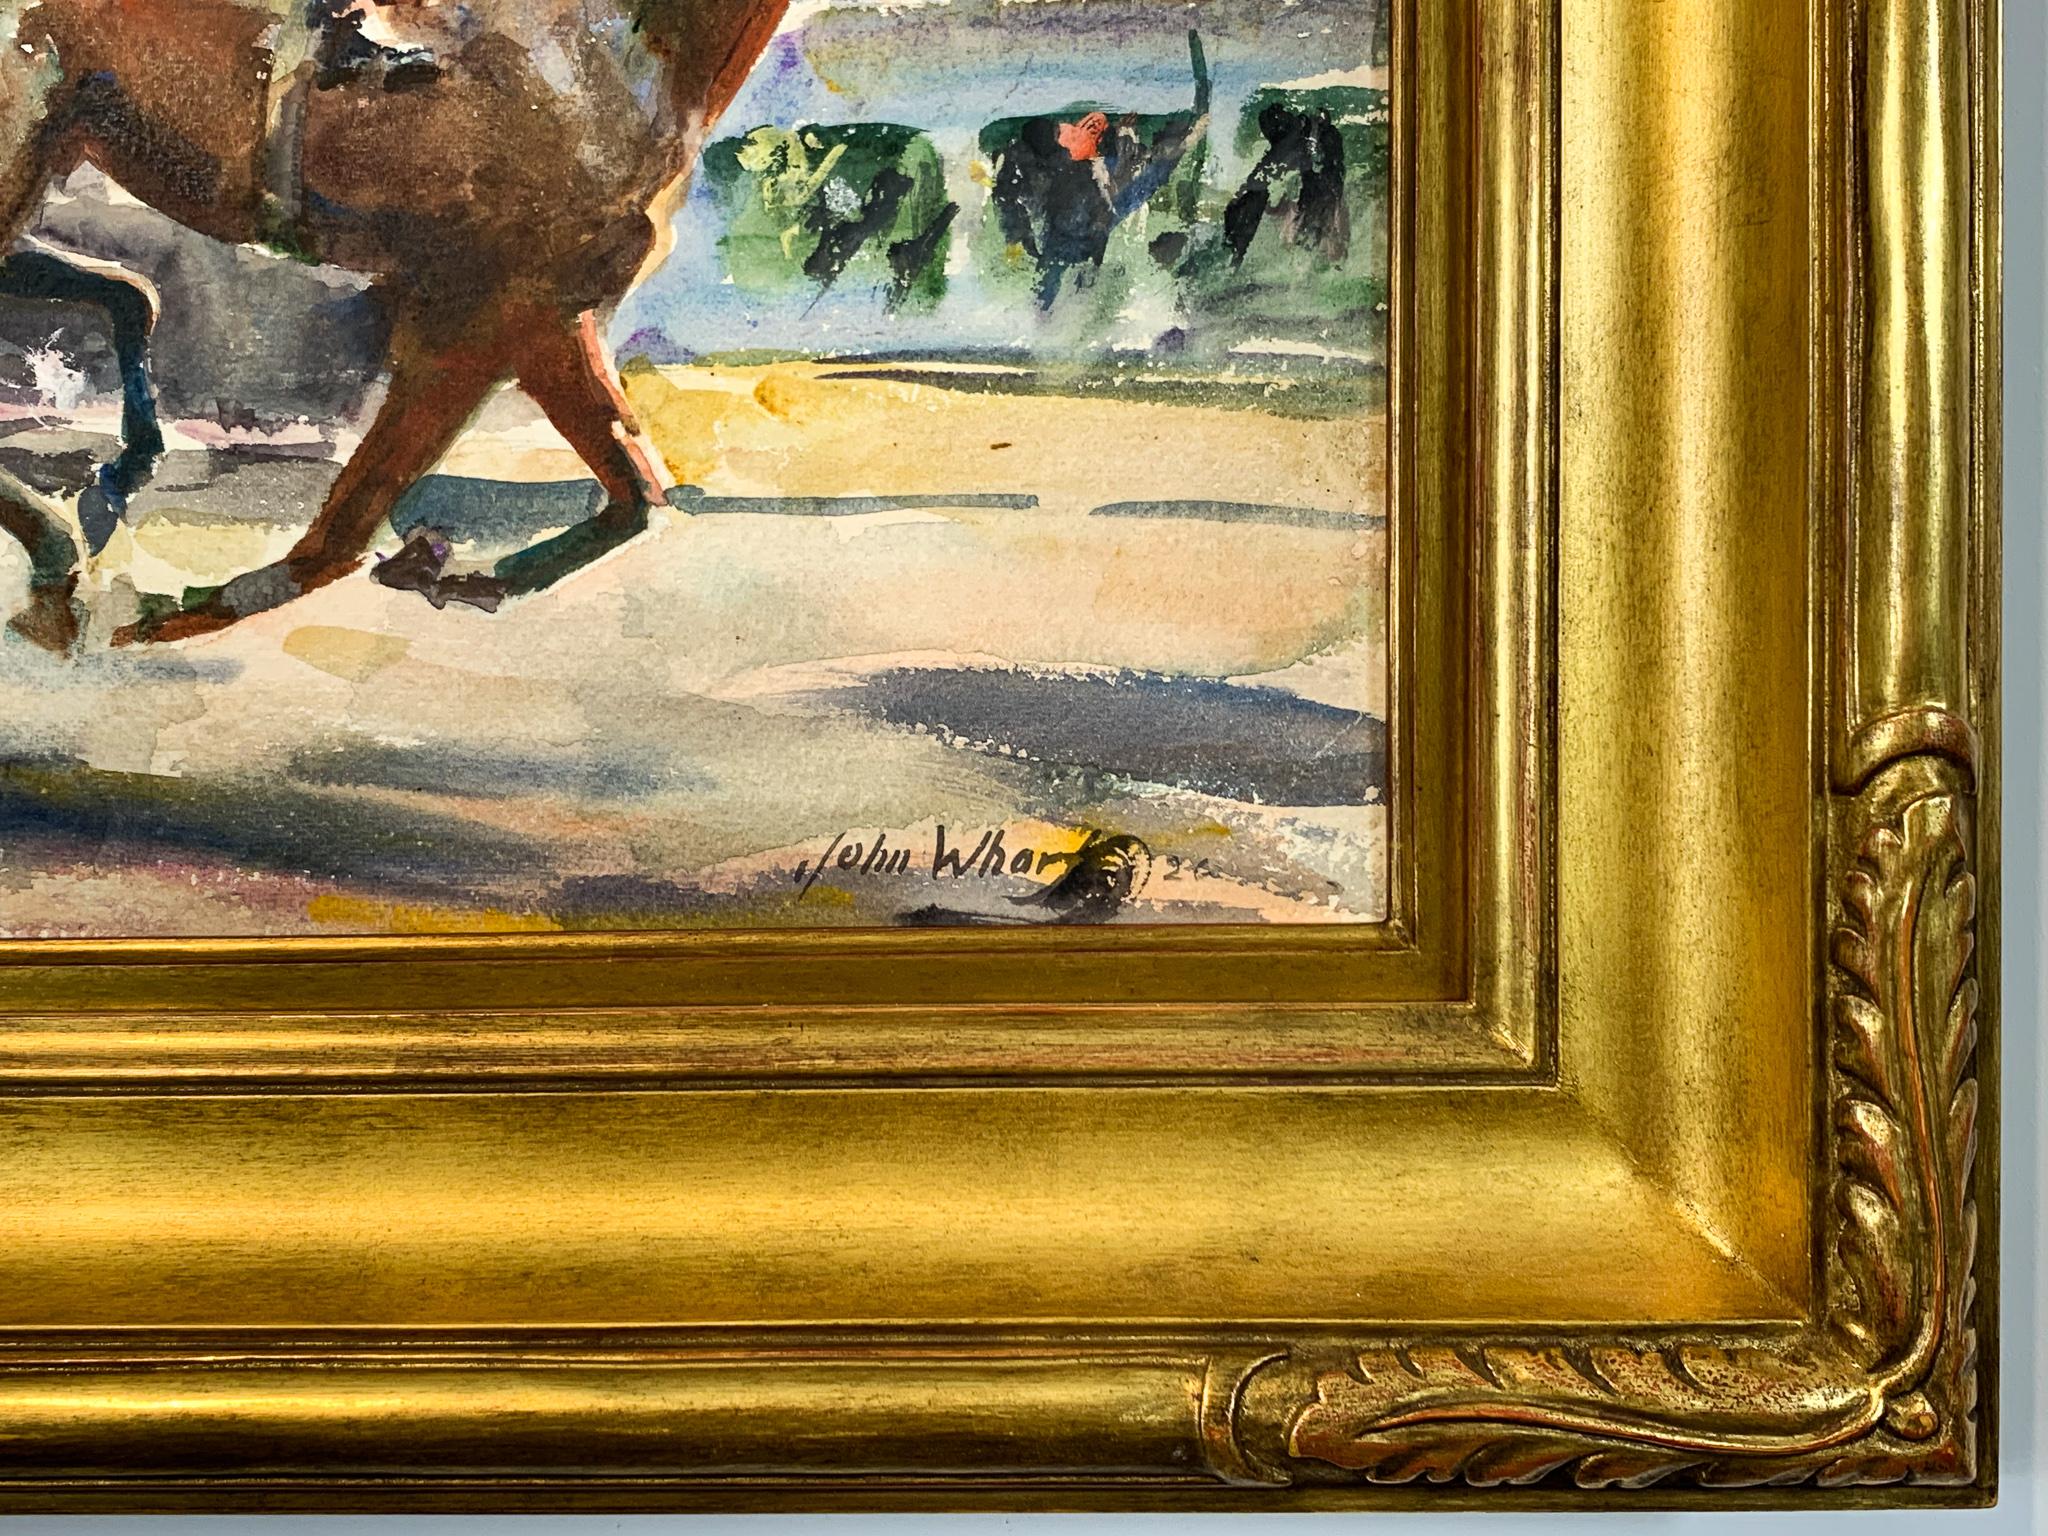 Approaching the Finish - Brown Animal Art by John Whorf